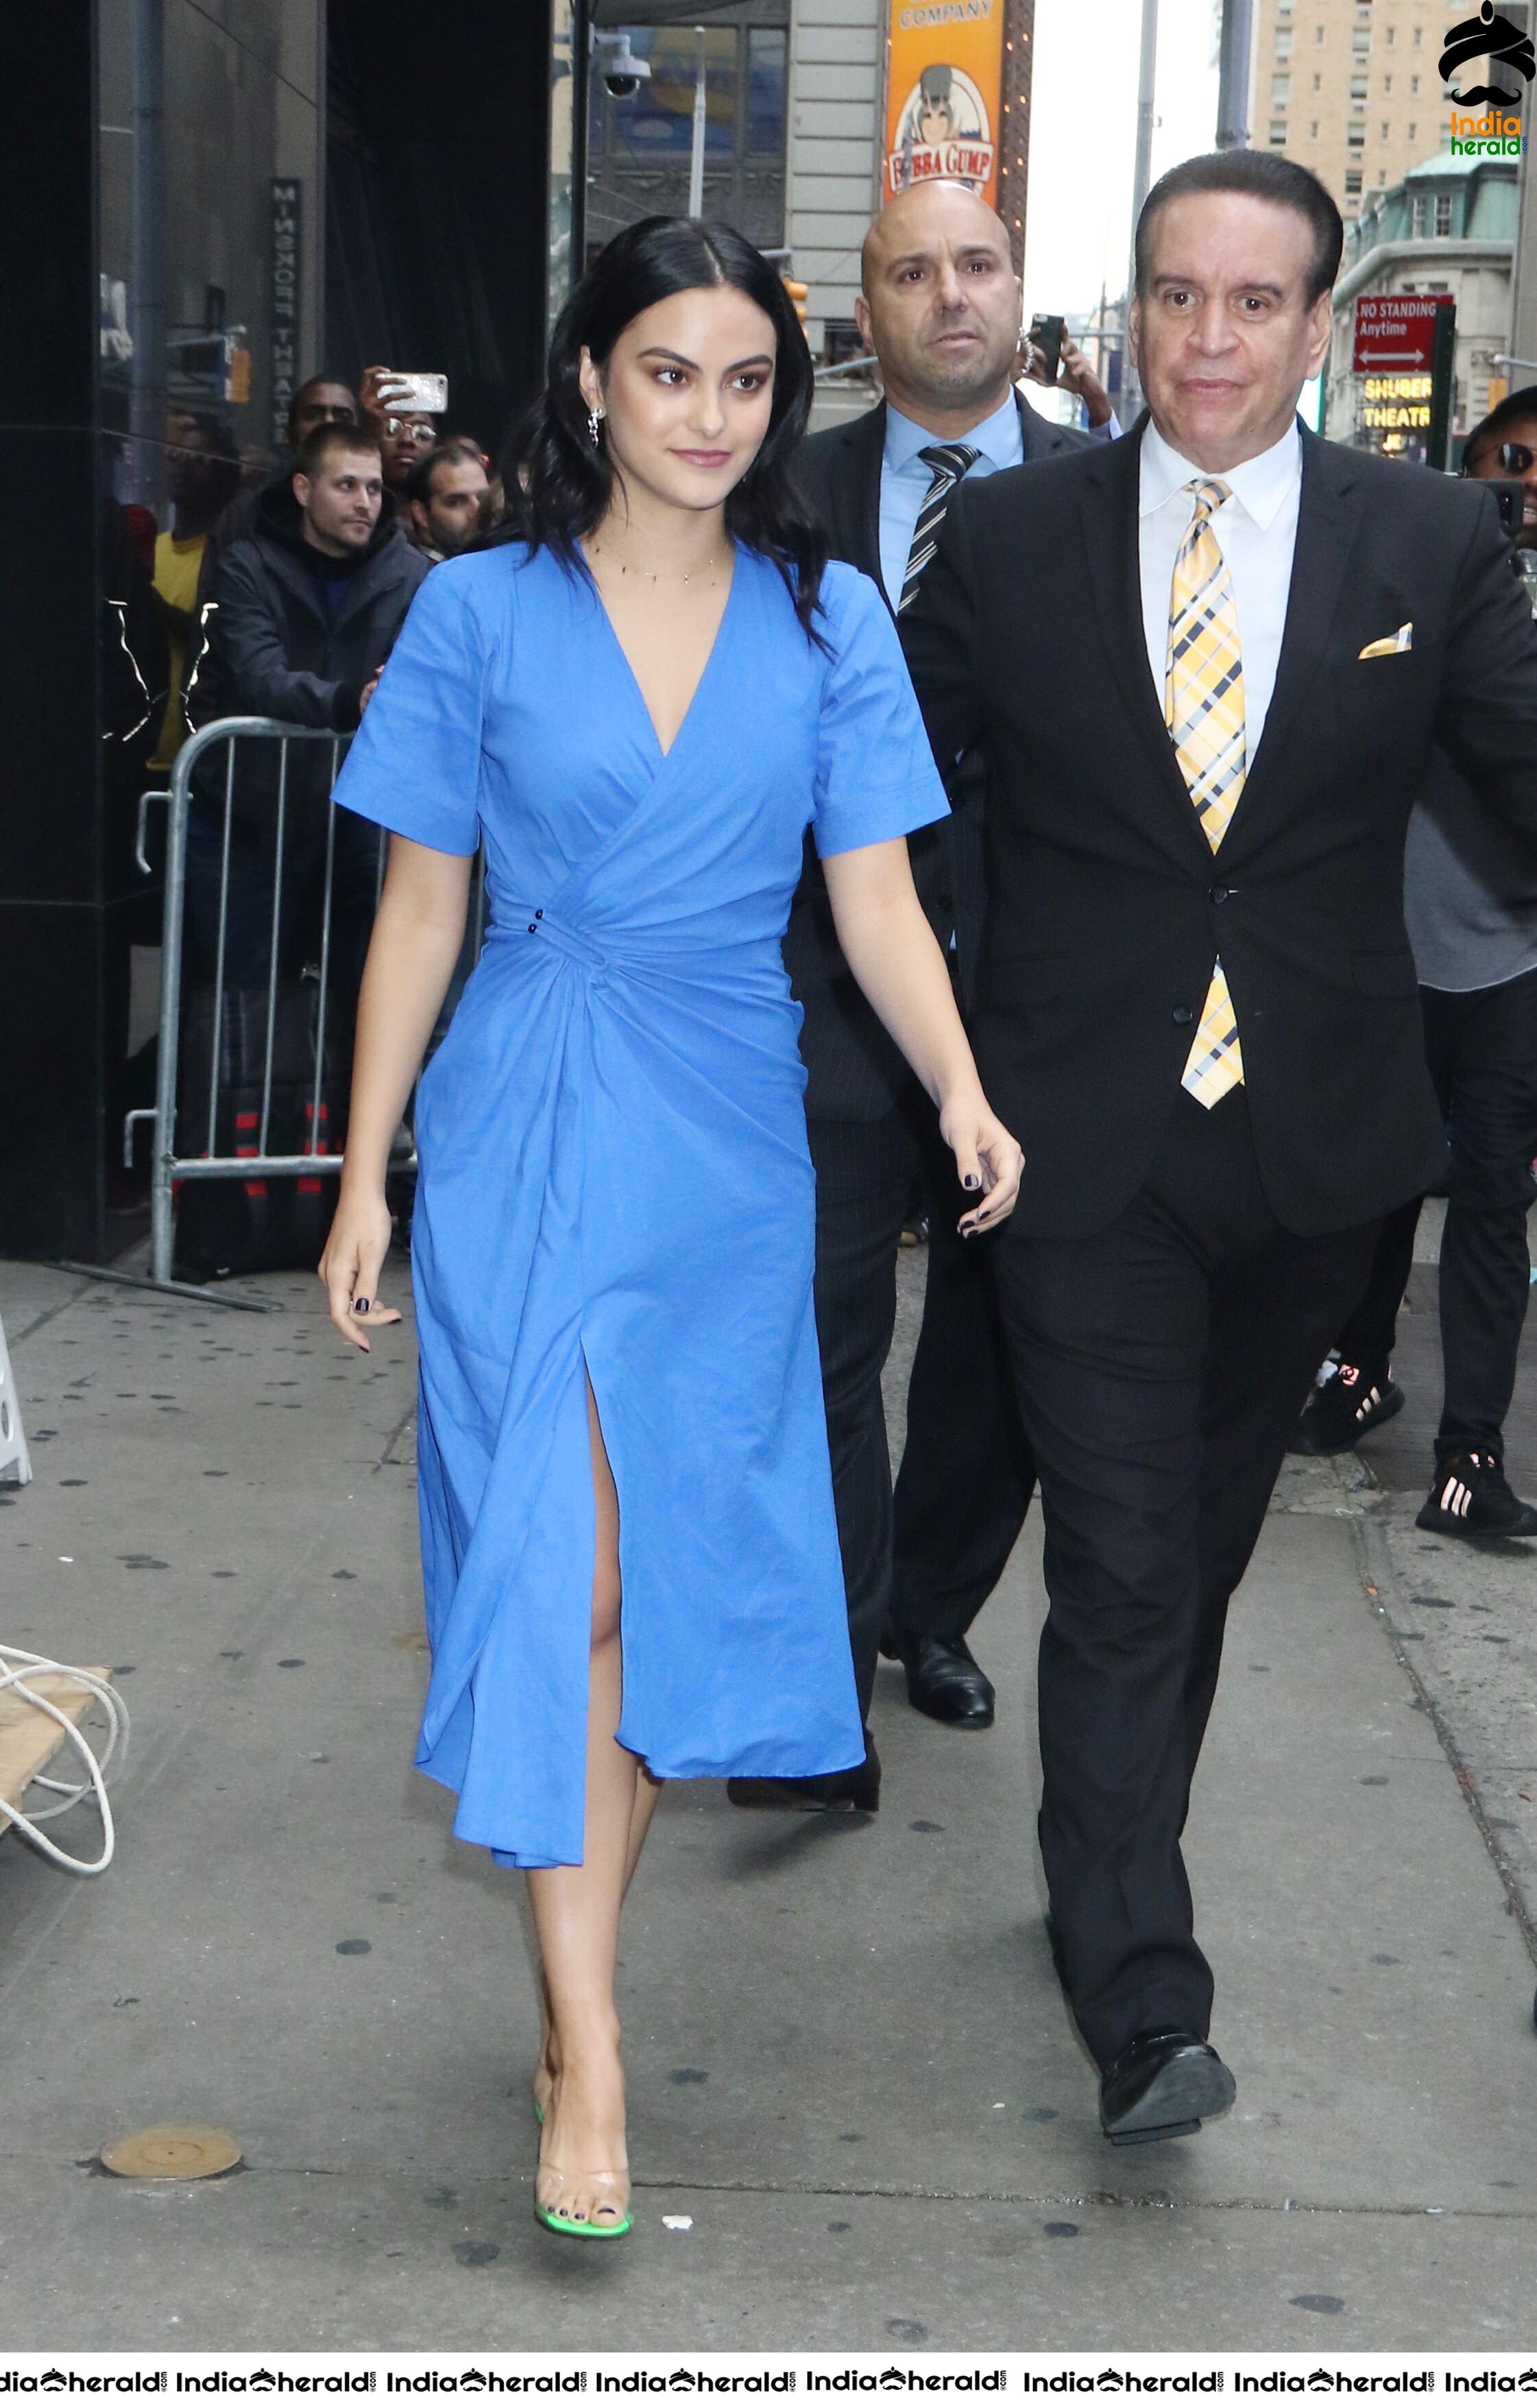 Camila Mendes On The Way to Good Morning America Show in NYC Set 1